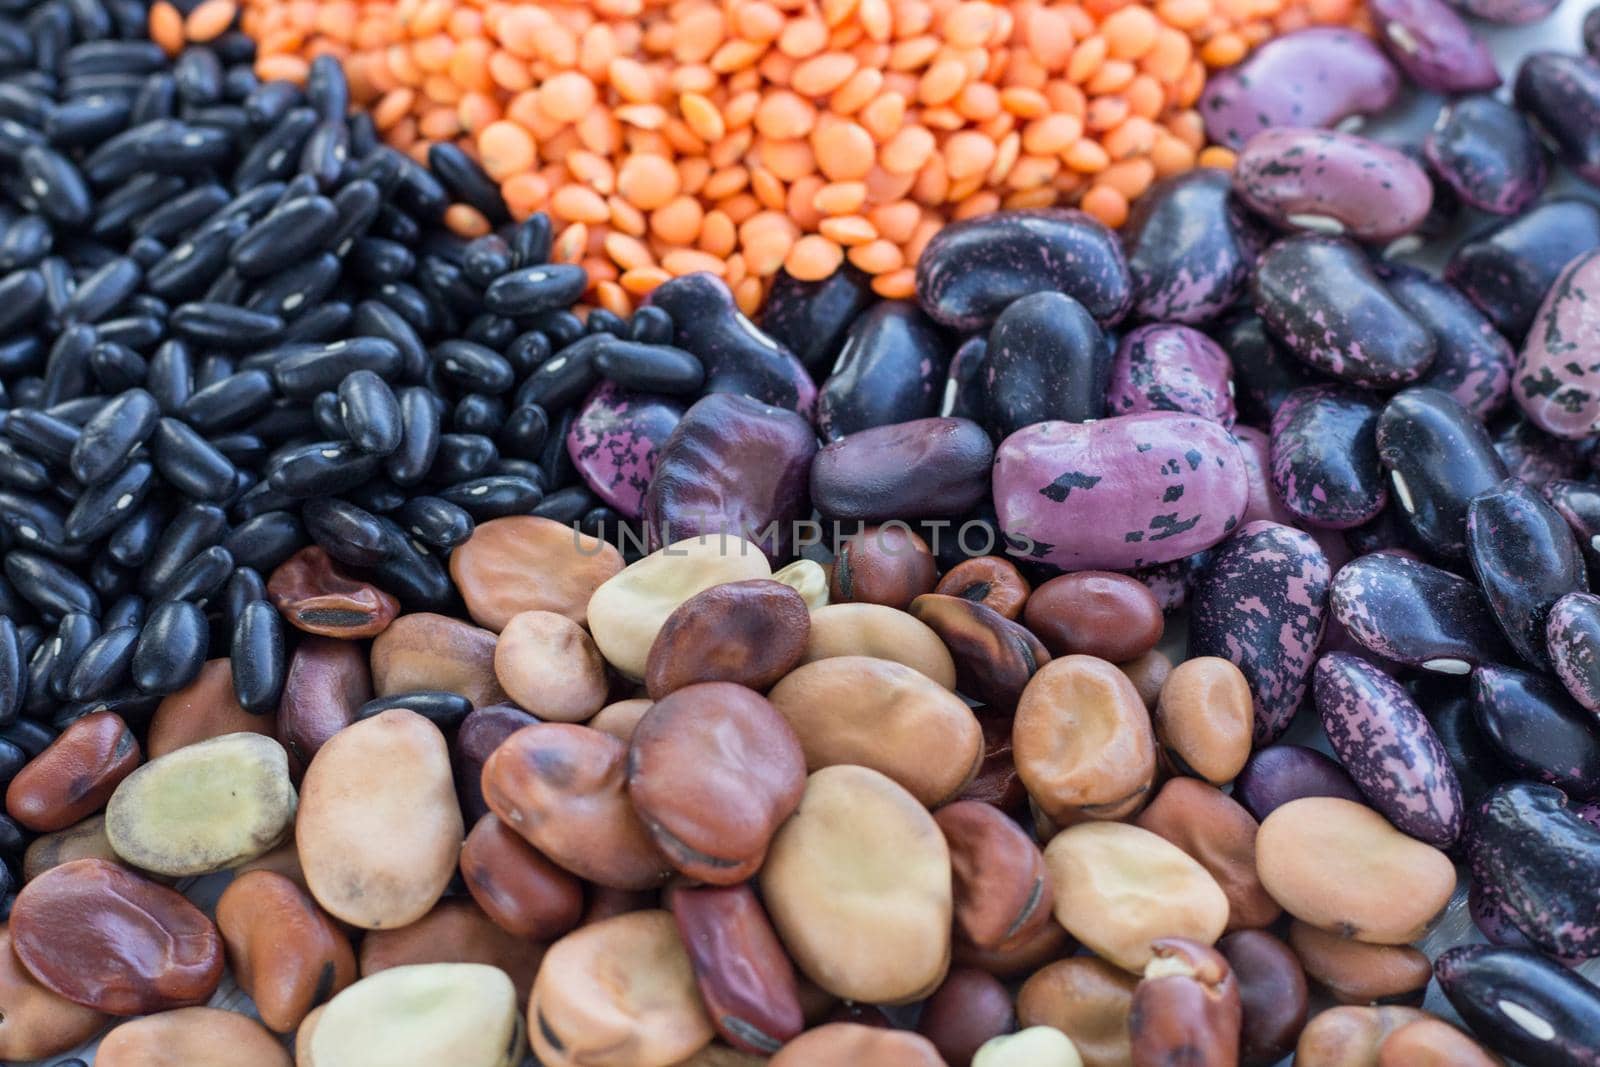 Multicolored background of healthy organic vegetarian grain food cereal bean lentils ingredients mix by VeraVerano